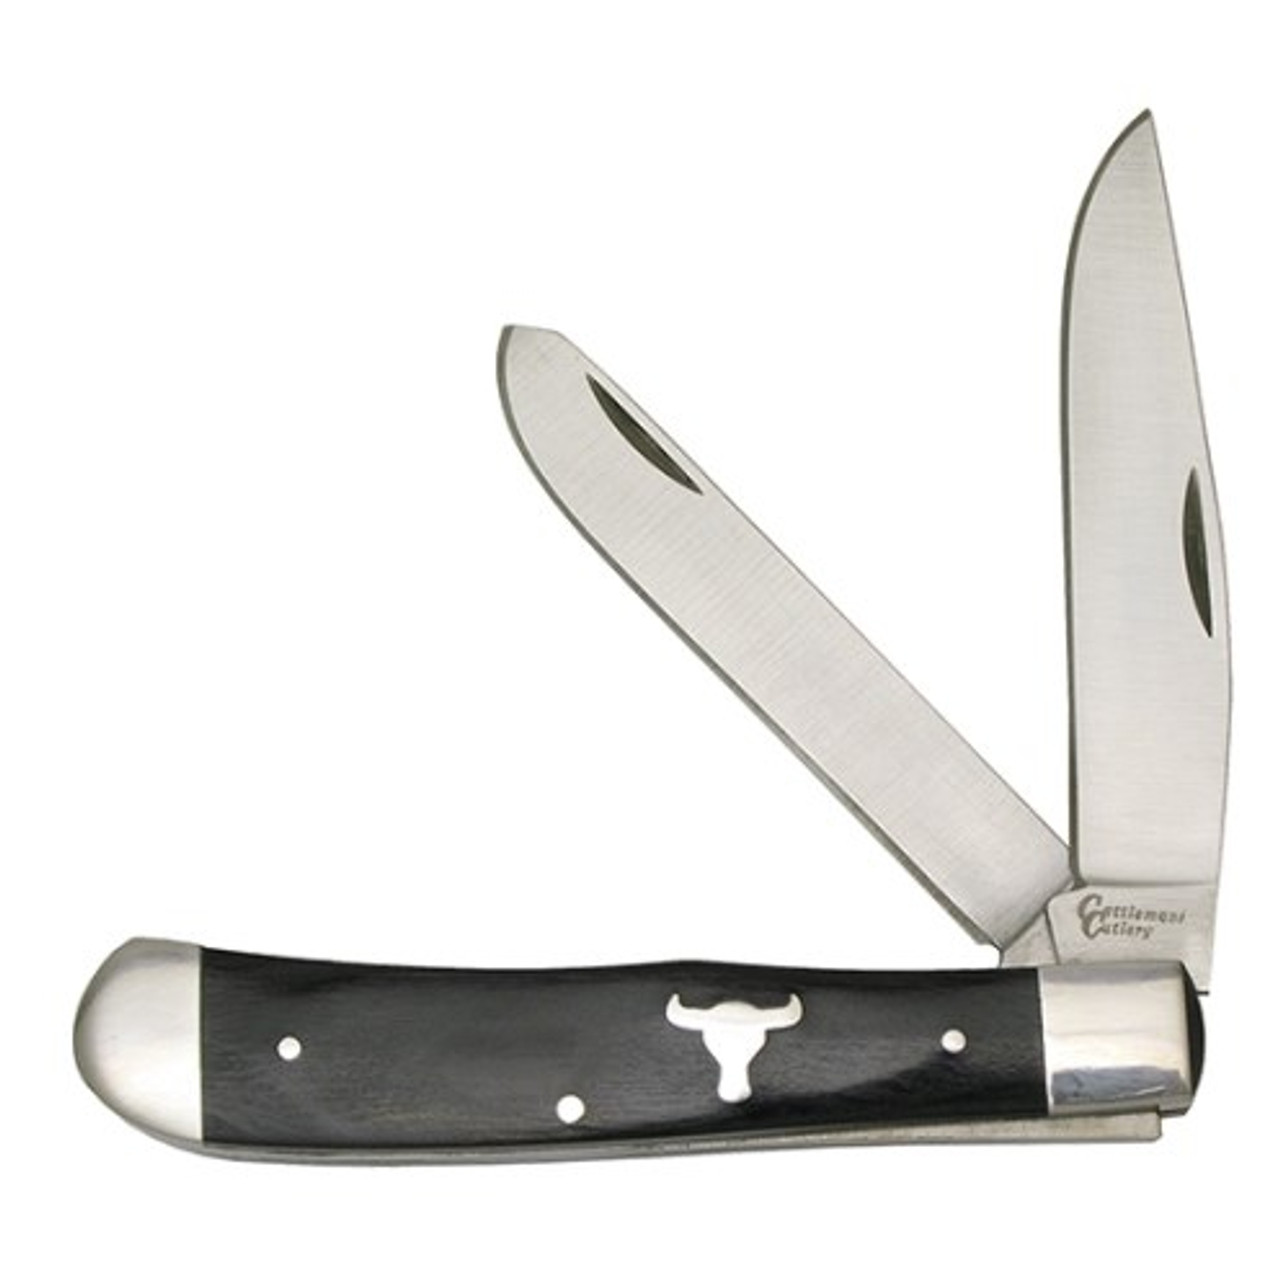 CATTLEMANS 4 3/16" TRAPPER W/ WOOD HANDLE -